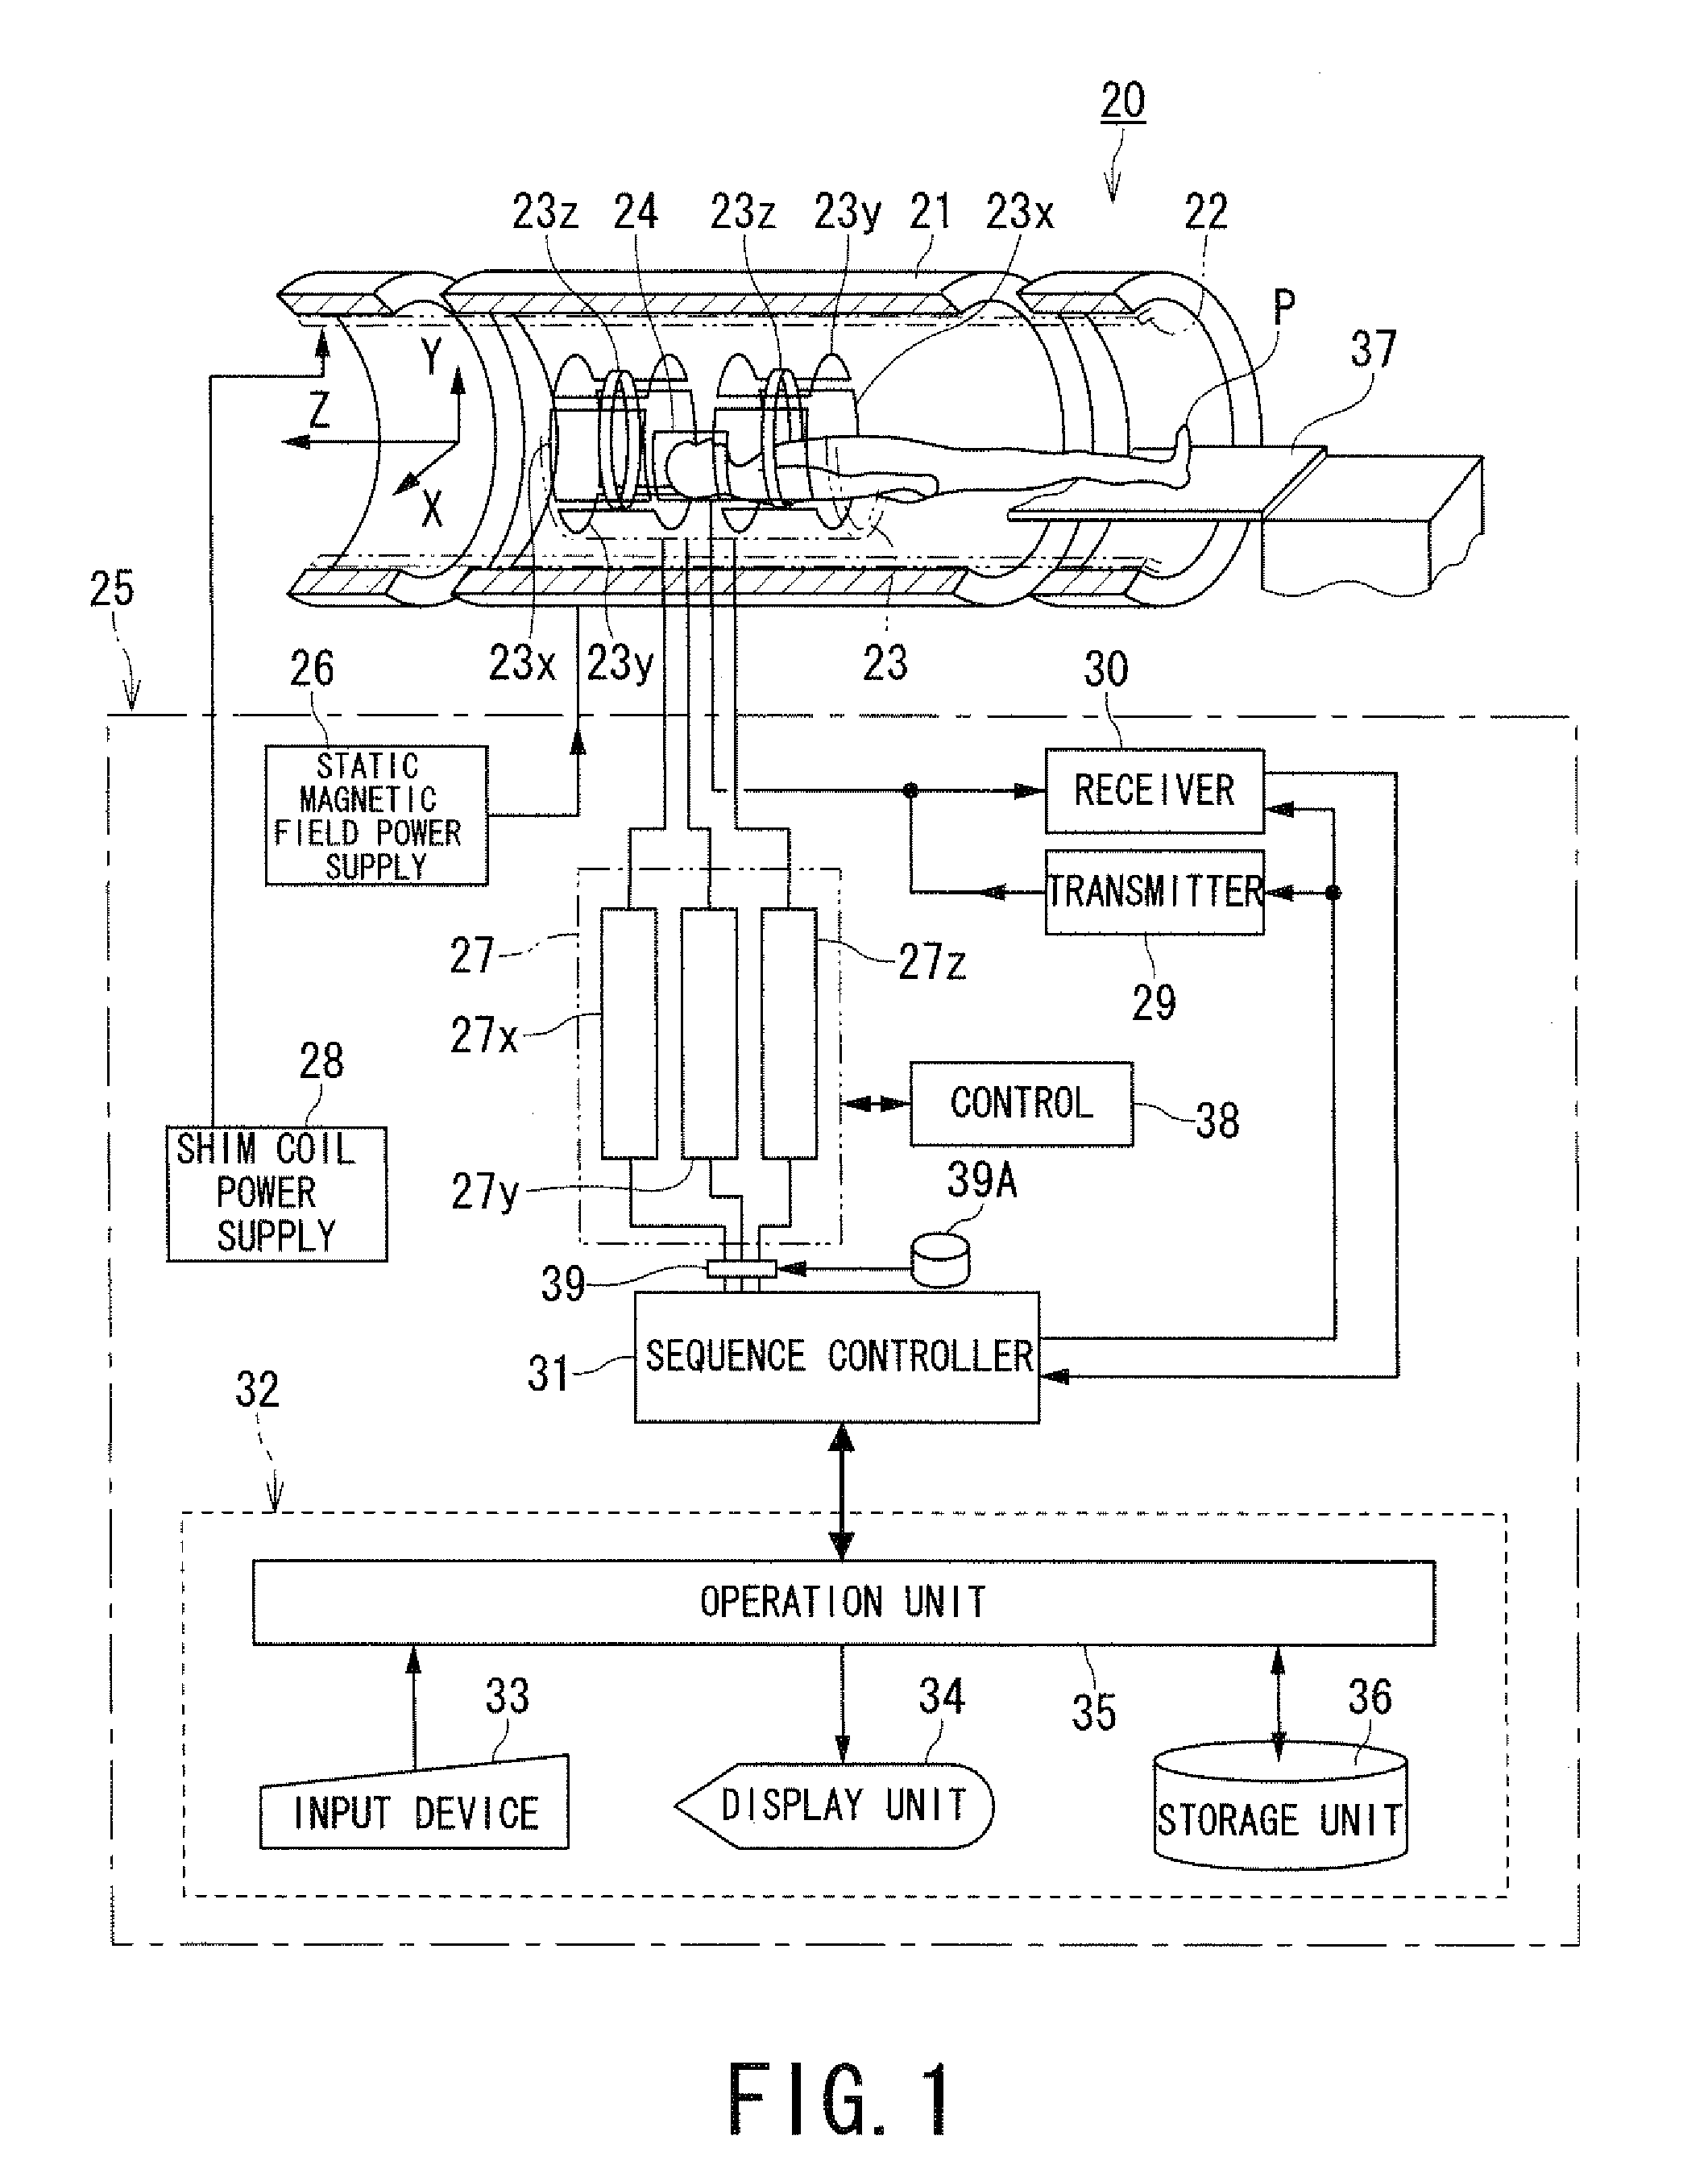 Magnetic resonance imaging apparatus/method counter-actively suppressing remnant eddy current magnetic fields generated from gradients applied before controlling contrast pre-pulses and MRI image data acquisition